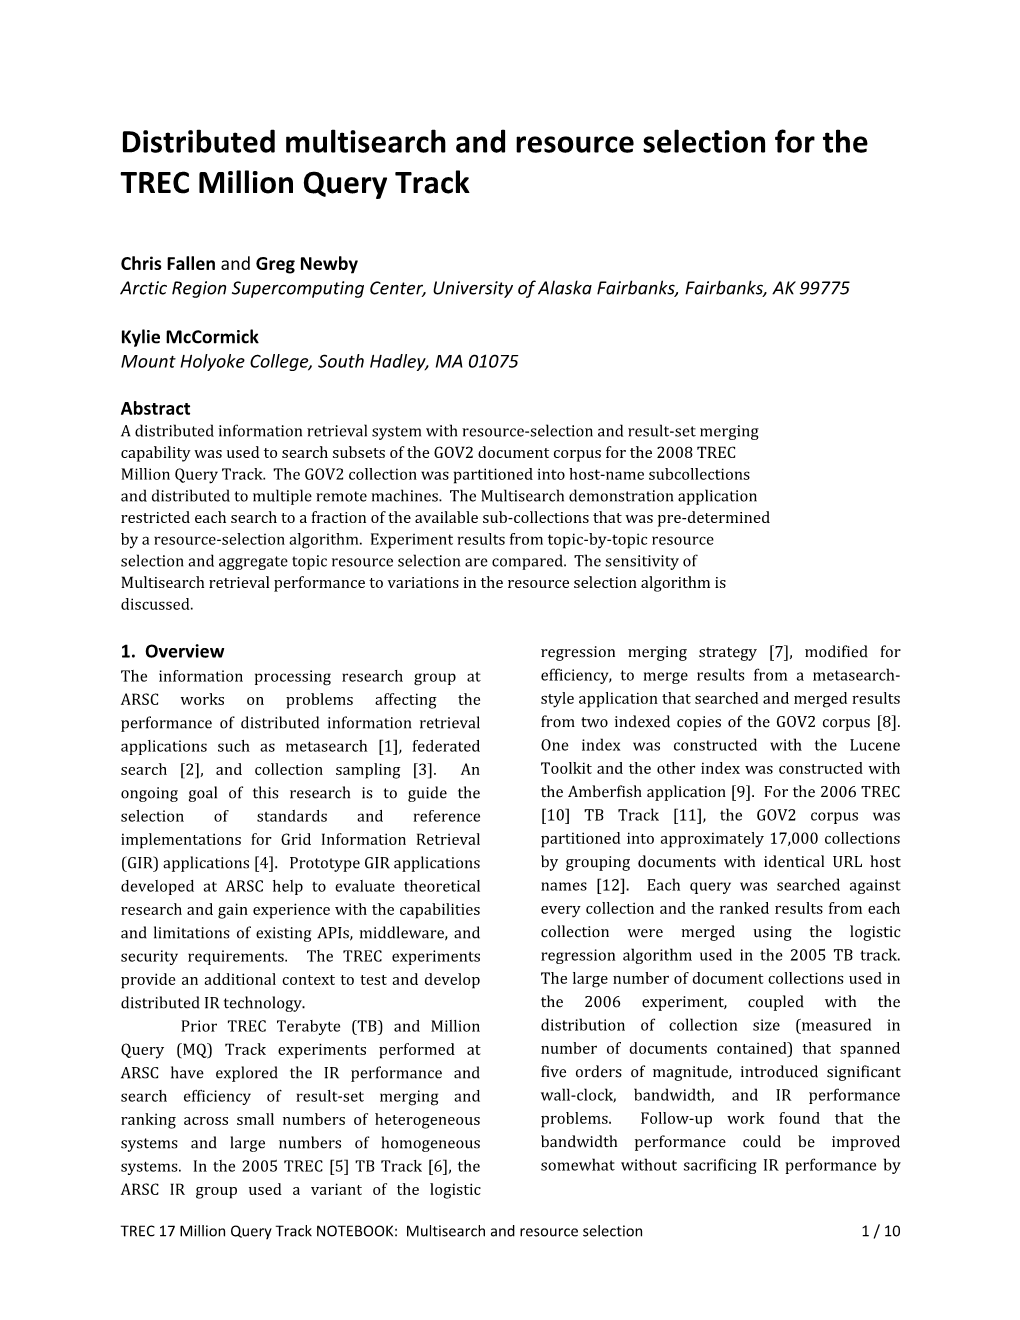 Distributed Multisearch and Resource Selection for the TREC Million Query Track